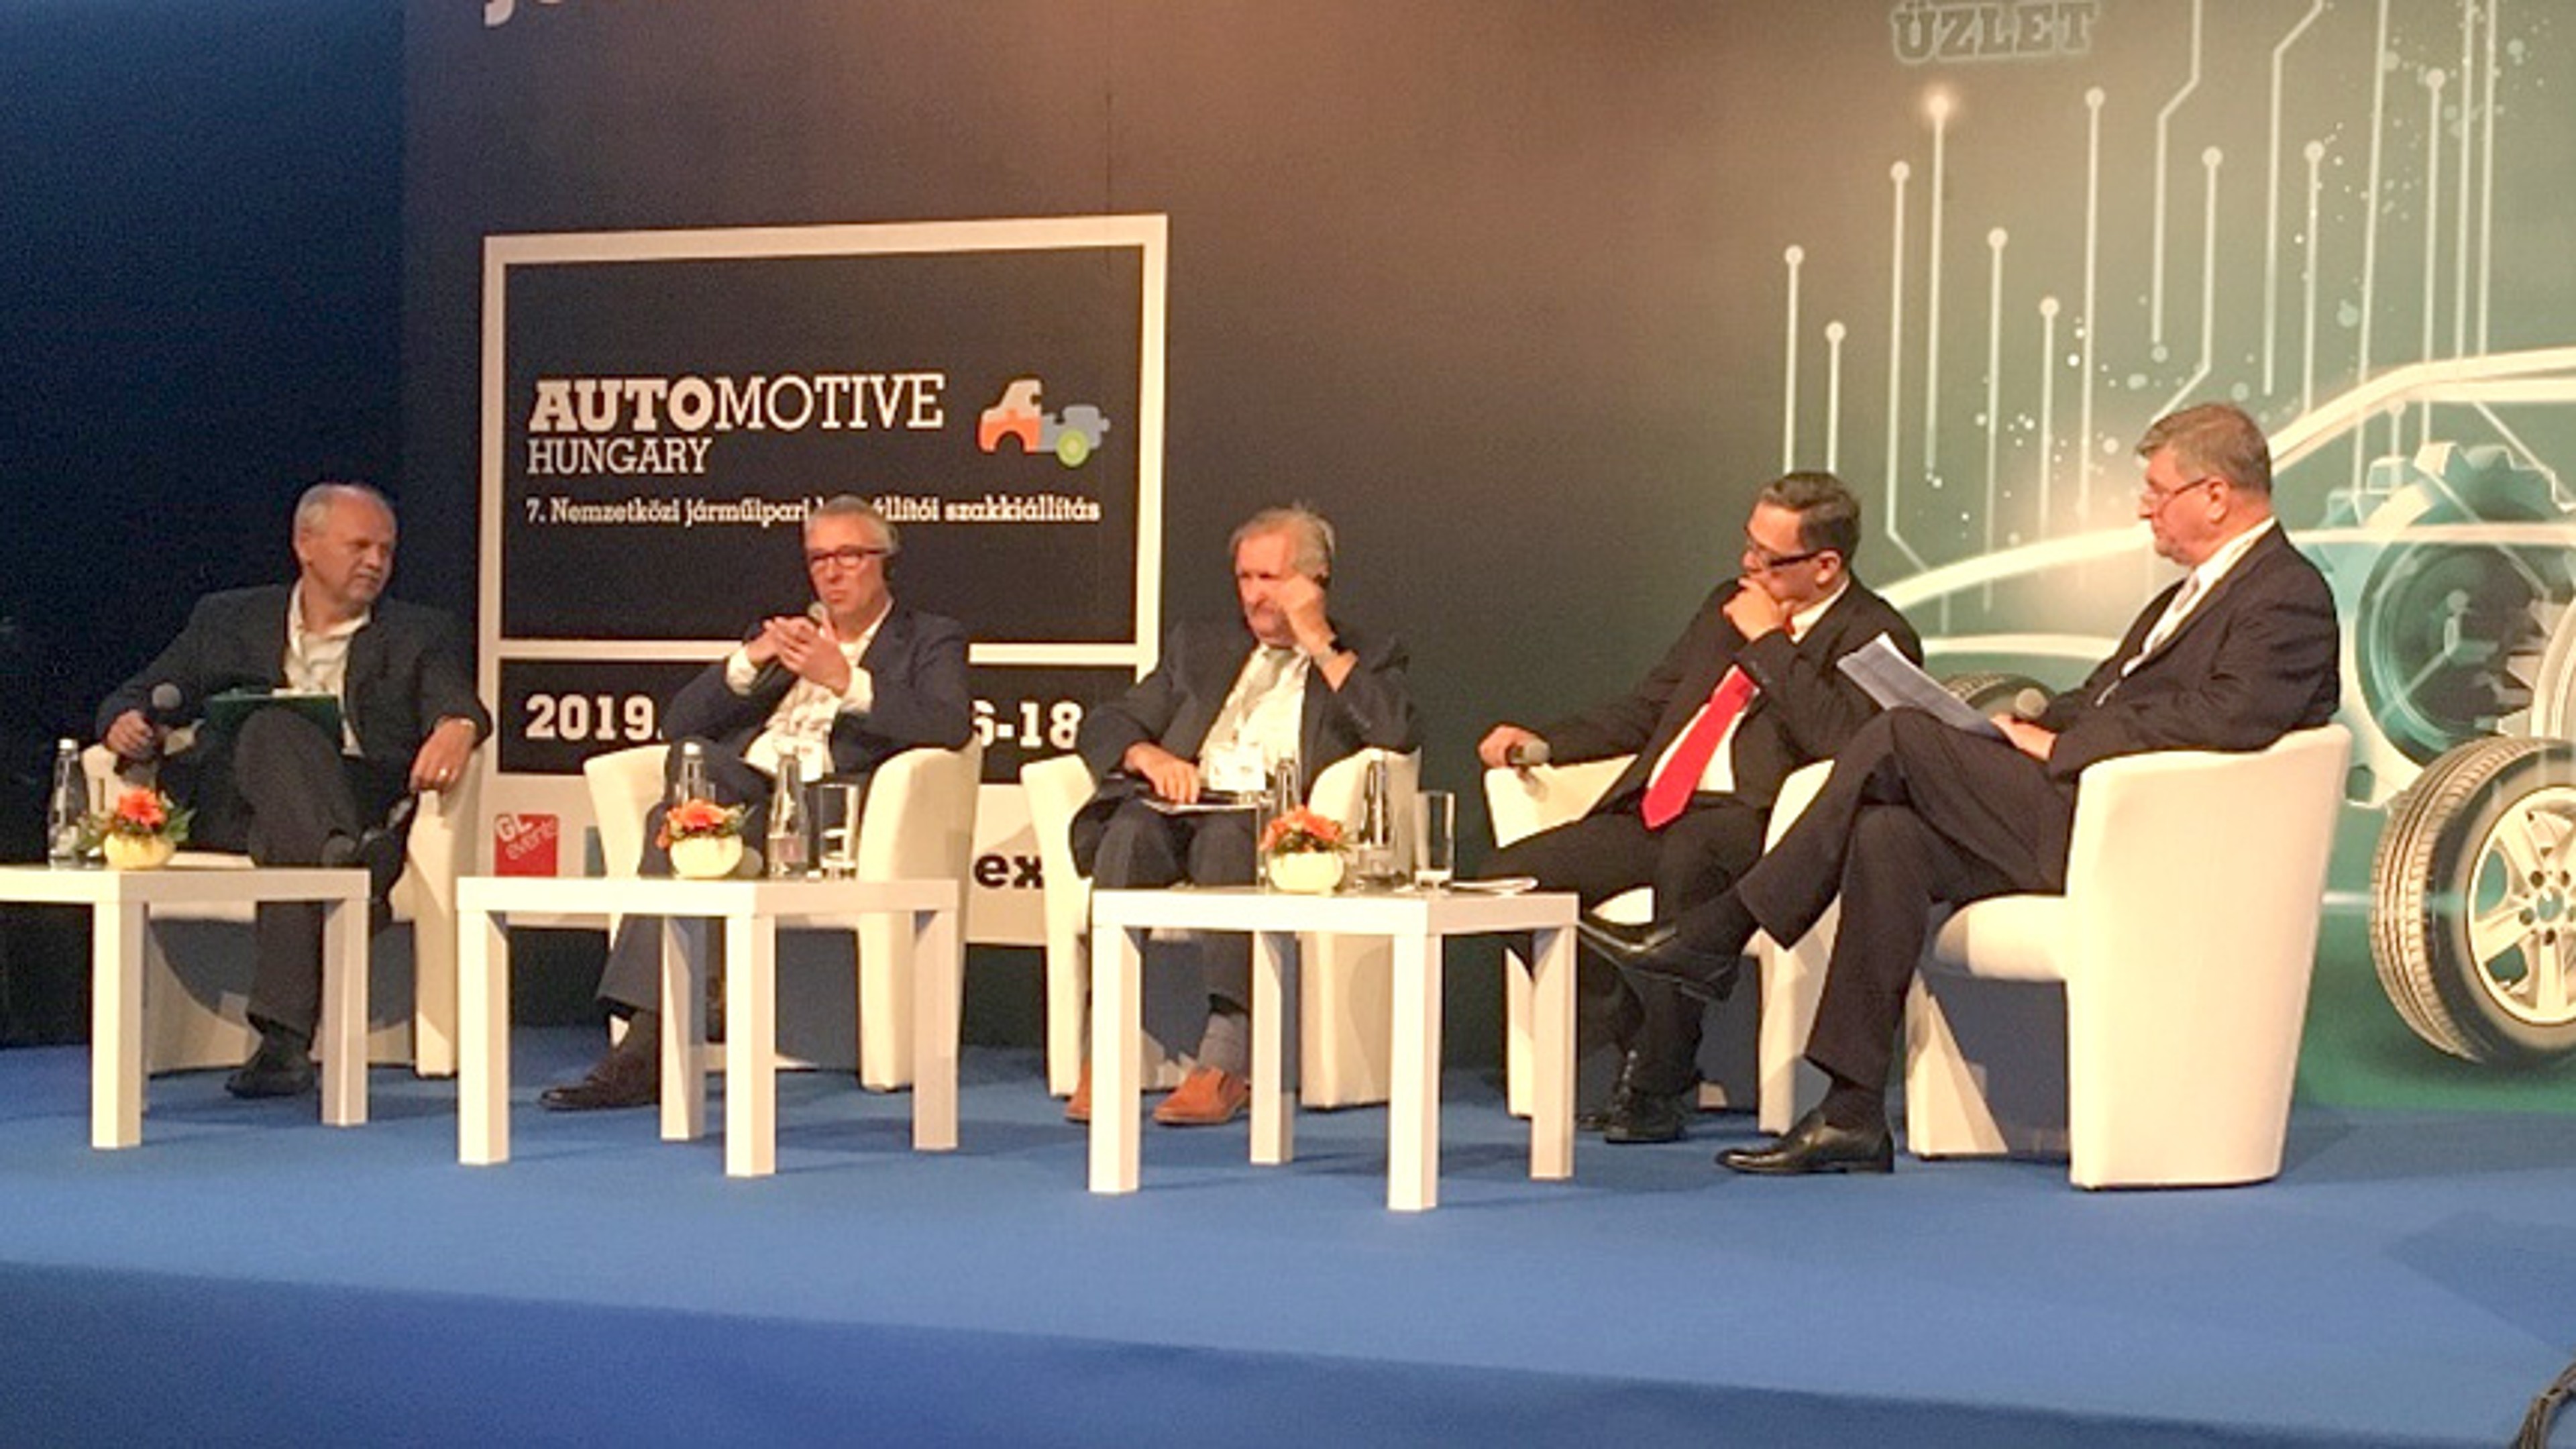 Uwe Mang, SEG Automotive, as a guest speaker in a panel discussion at Automotive Hungary Expo 